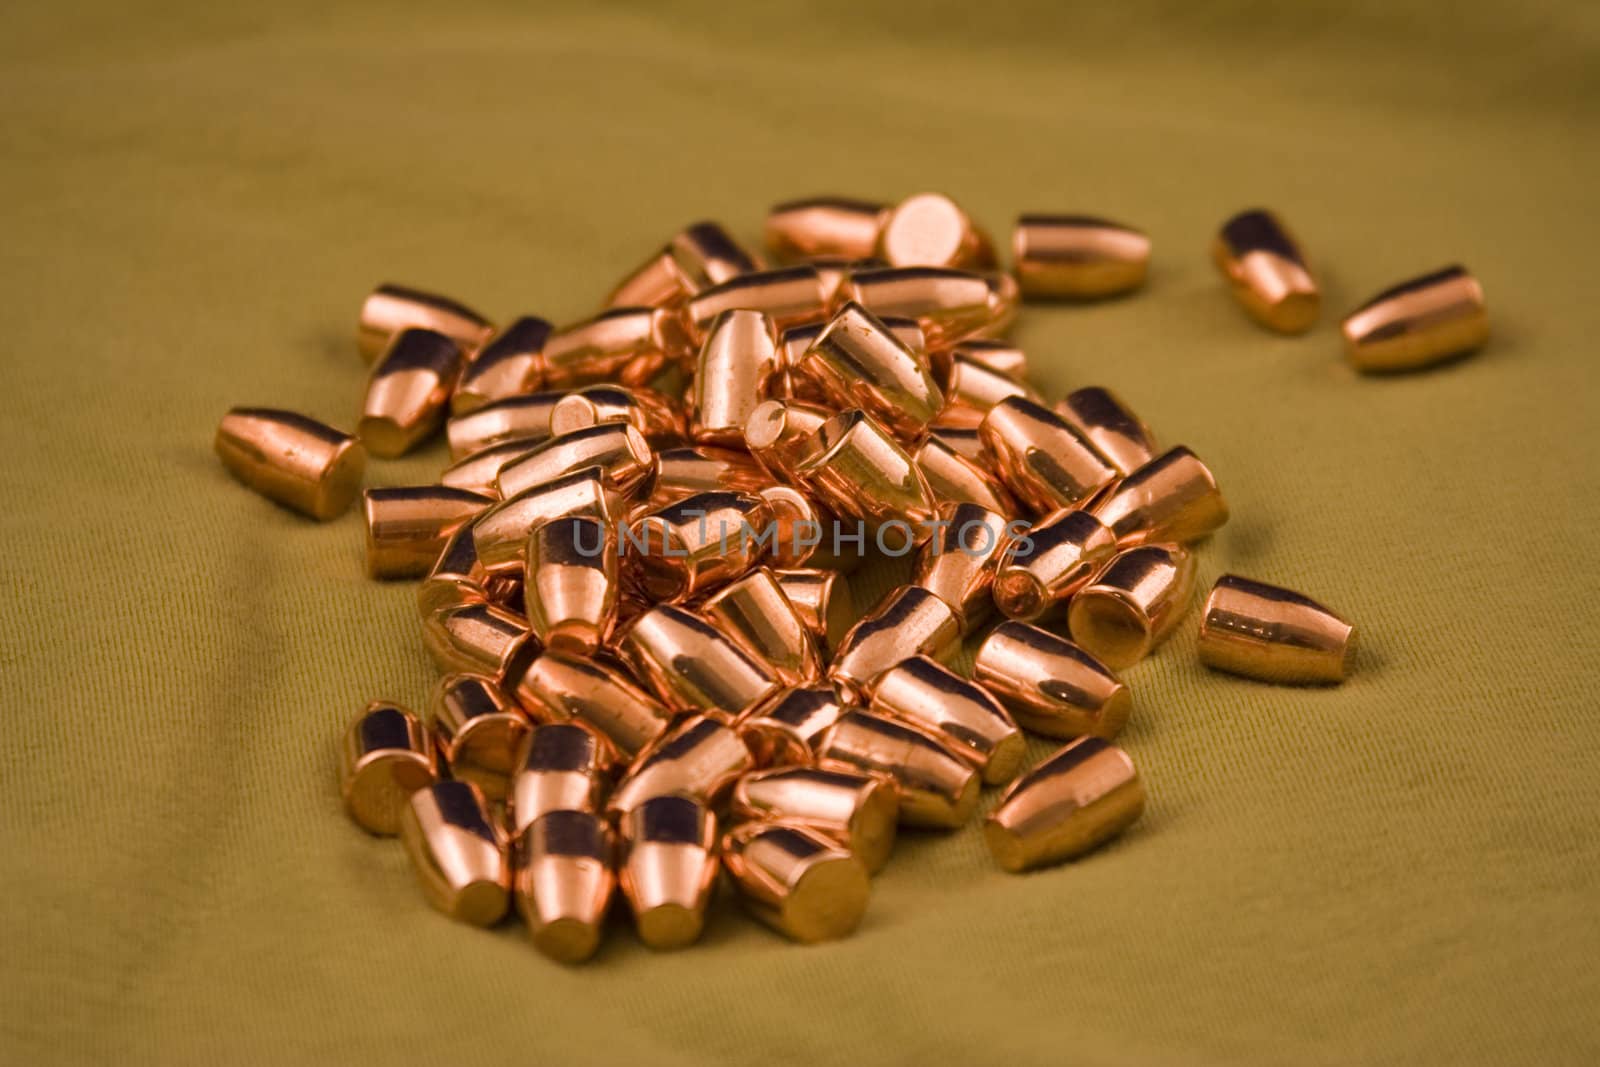 9 mm flat point bullets on a green background